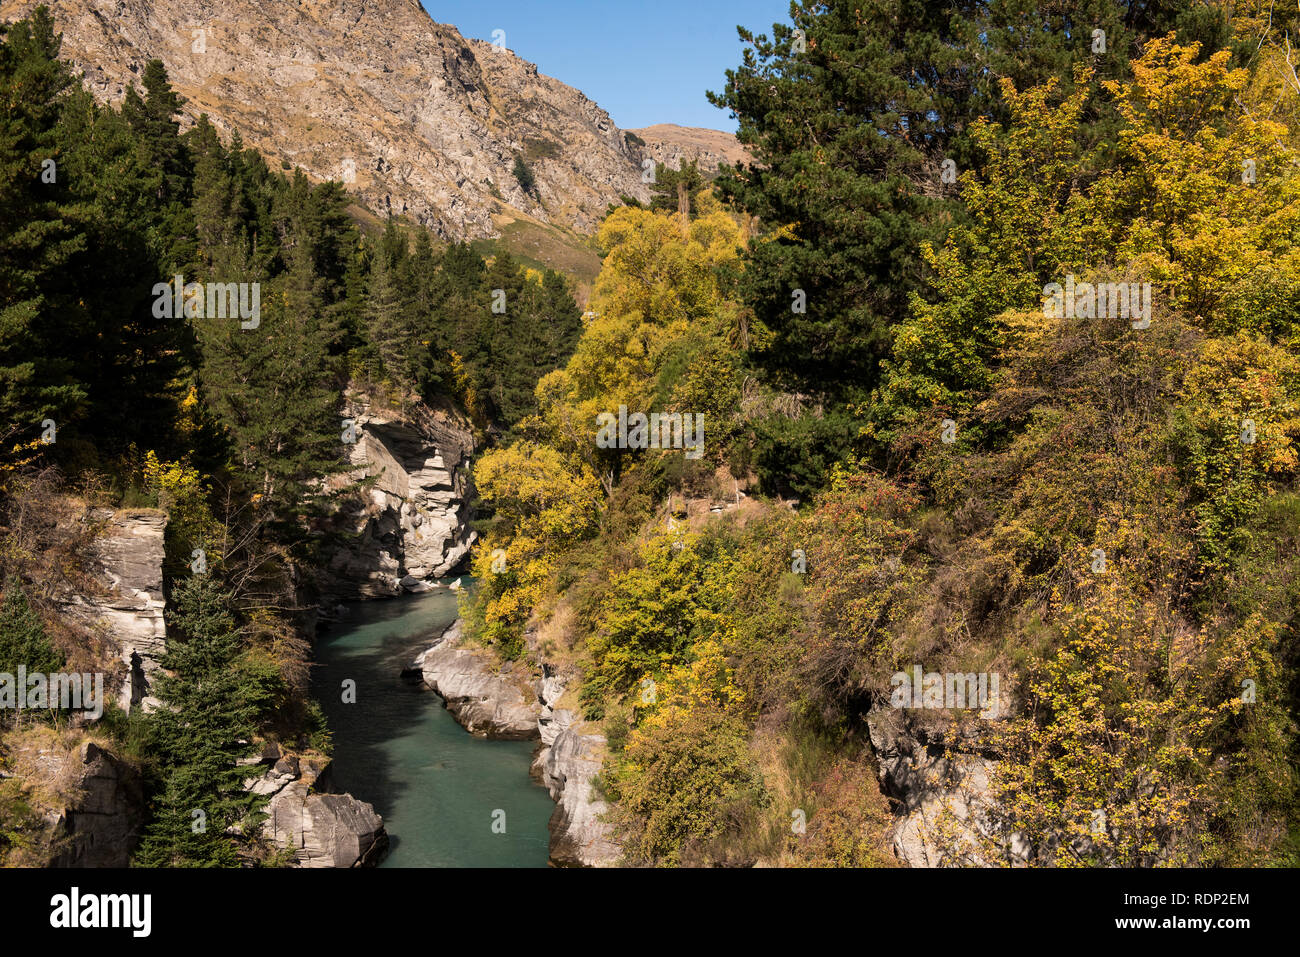 Image of the Shotover River and the Shotover River Canyon outside of Queenstown on the South Island of New Zealand. Stock Photo